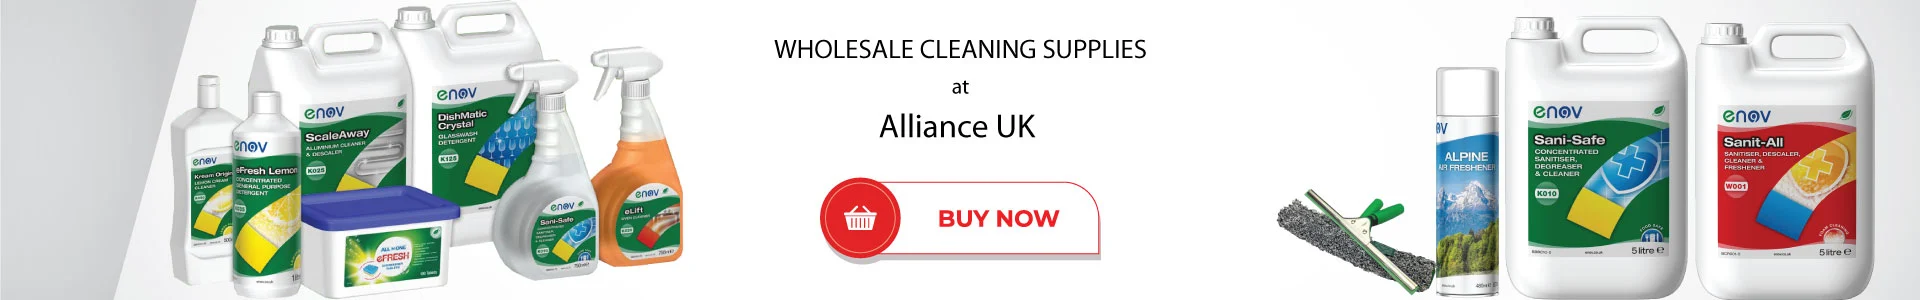 Wholesale Cleaning Supplies at Alliance UK